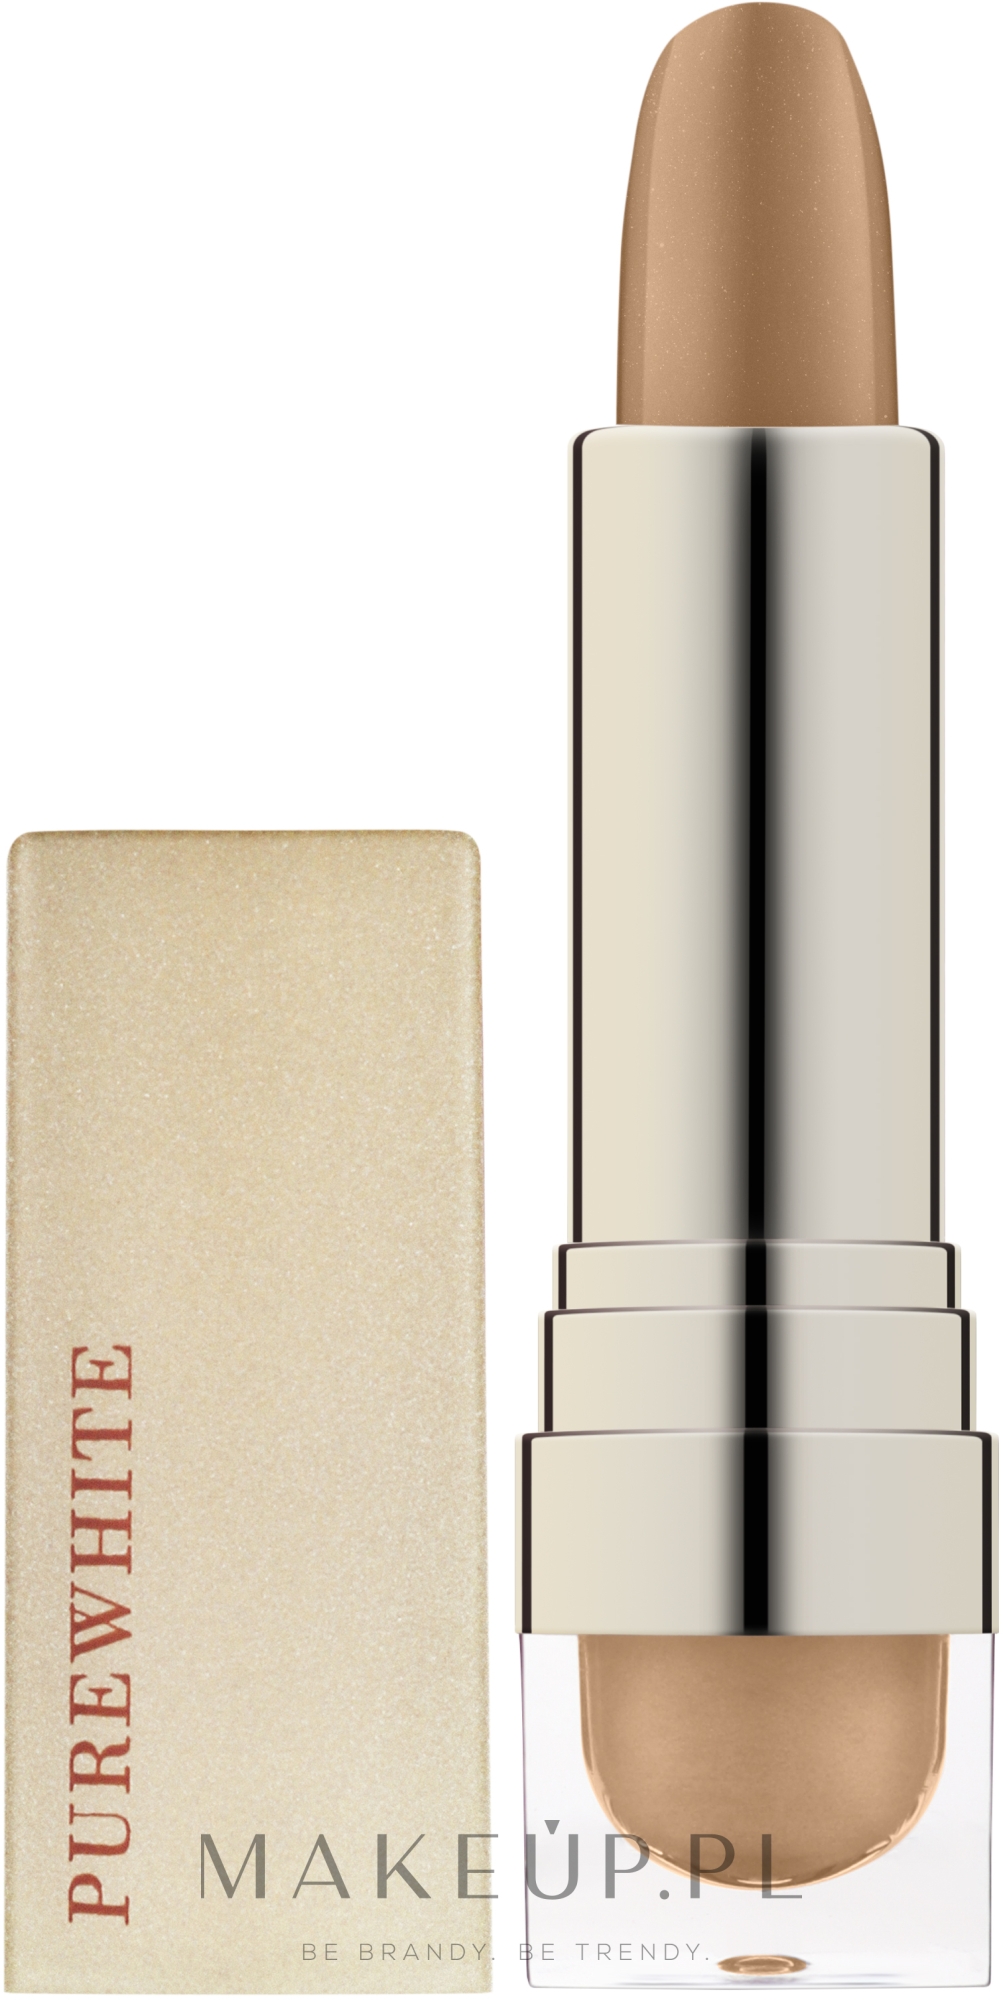 Balsam do ust - Pure White Cosmetics SunKissed Tinted Lip Shimmer Balm SPF 20 — Zdjęcie Bronze Sunset